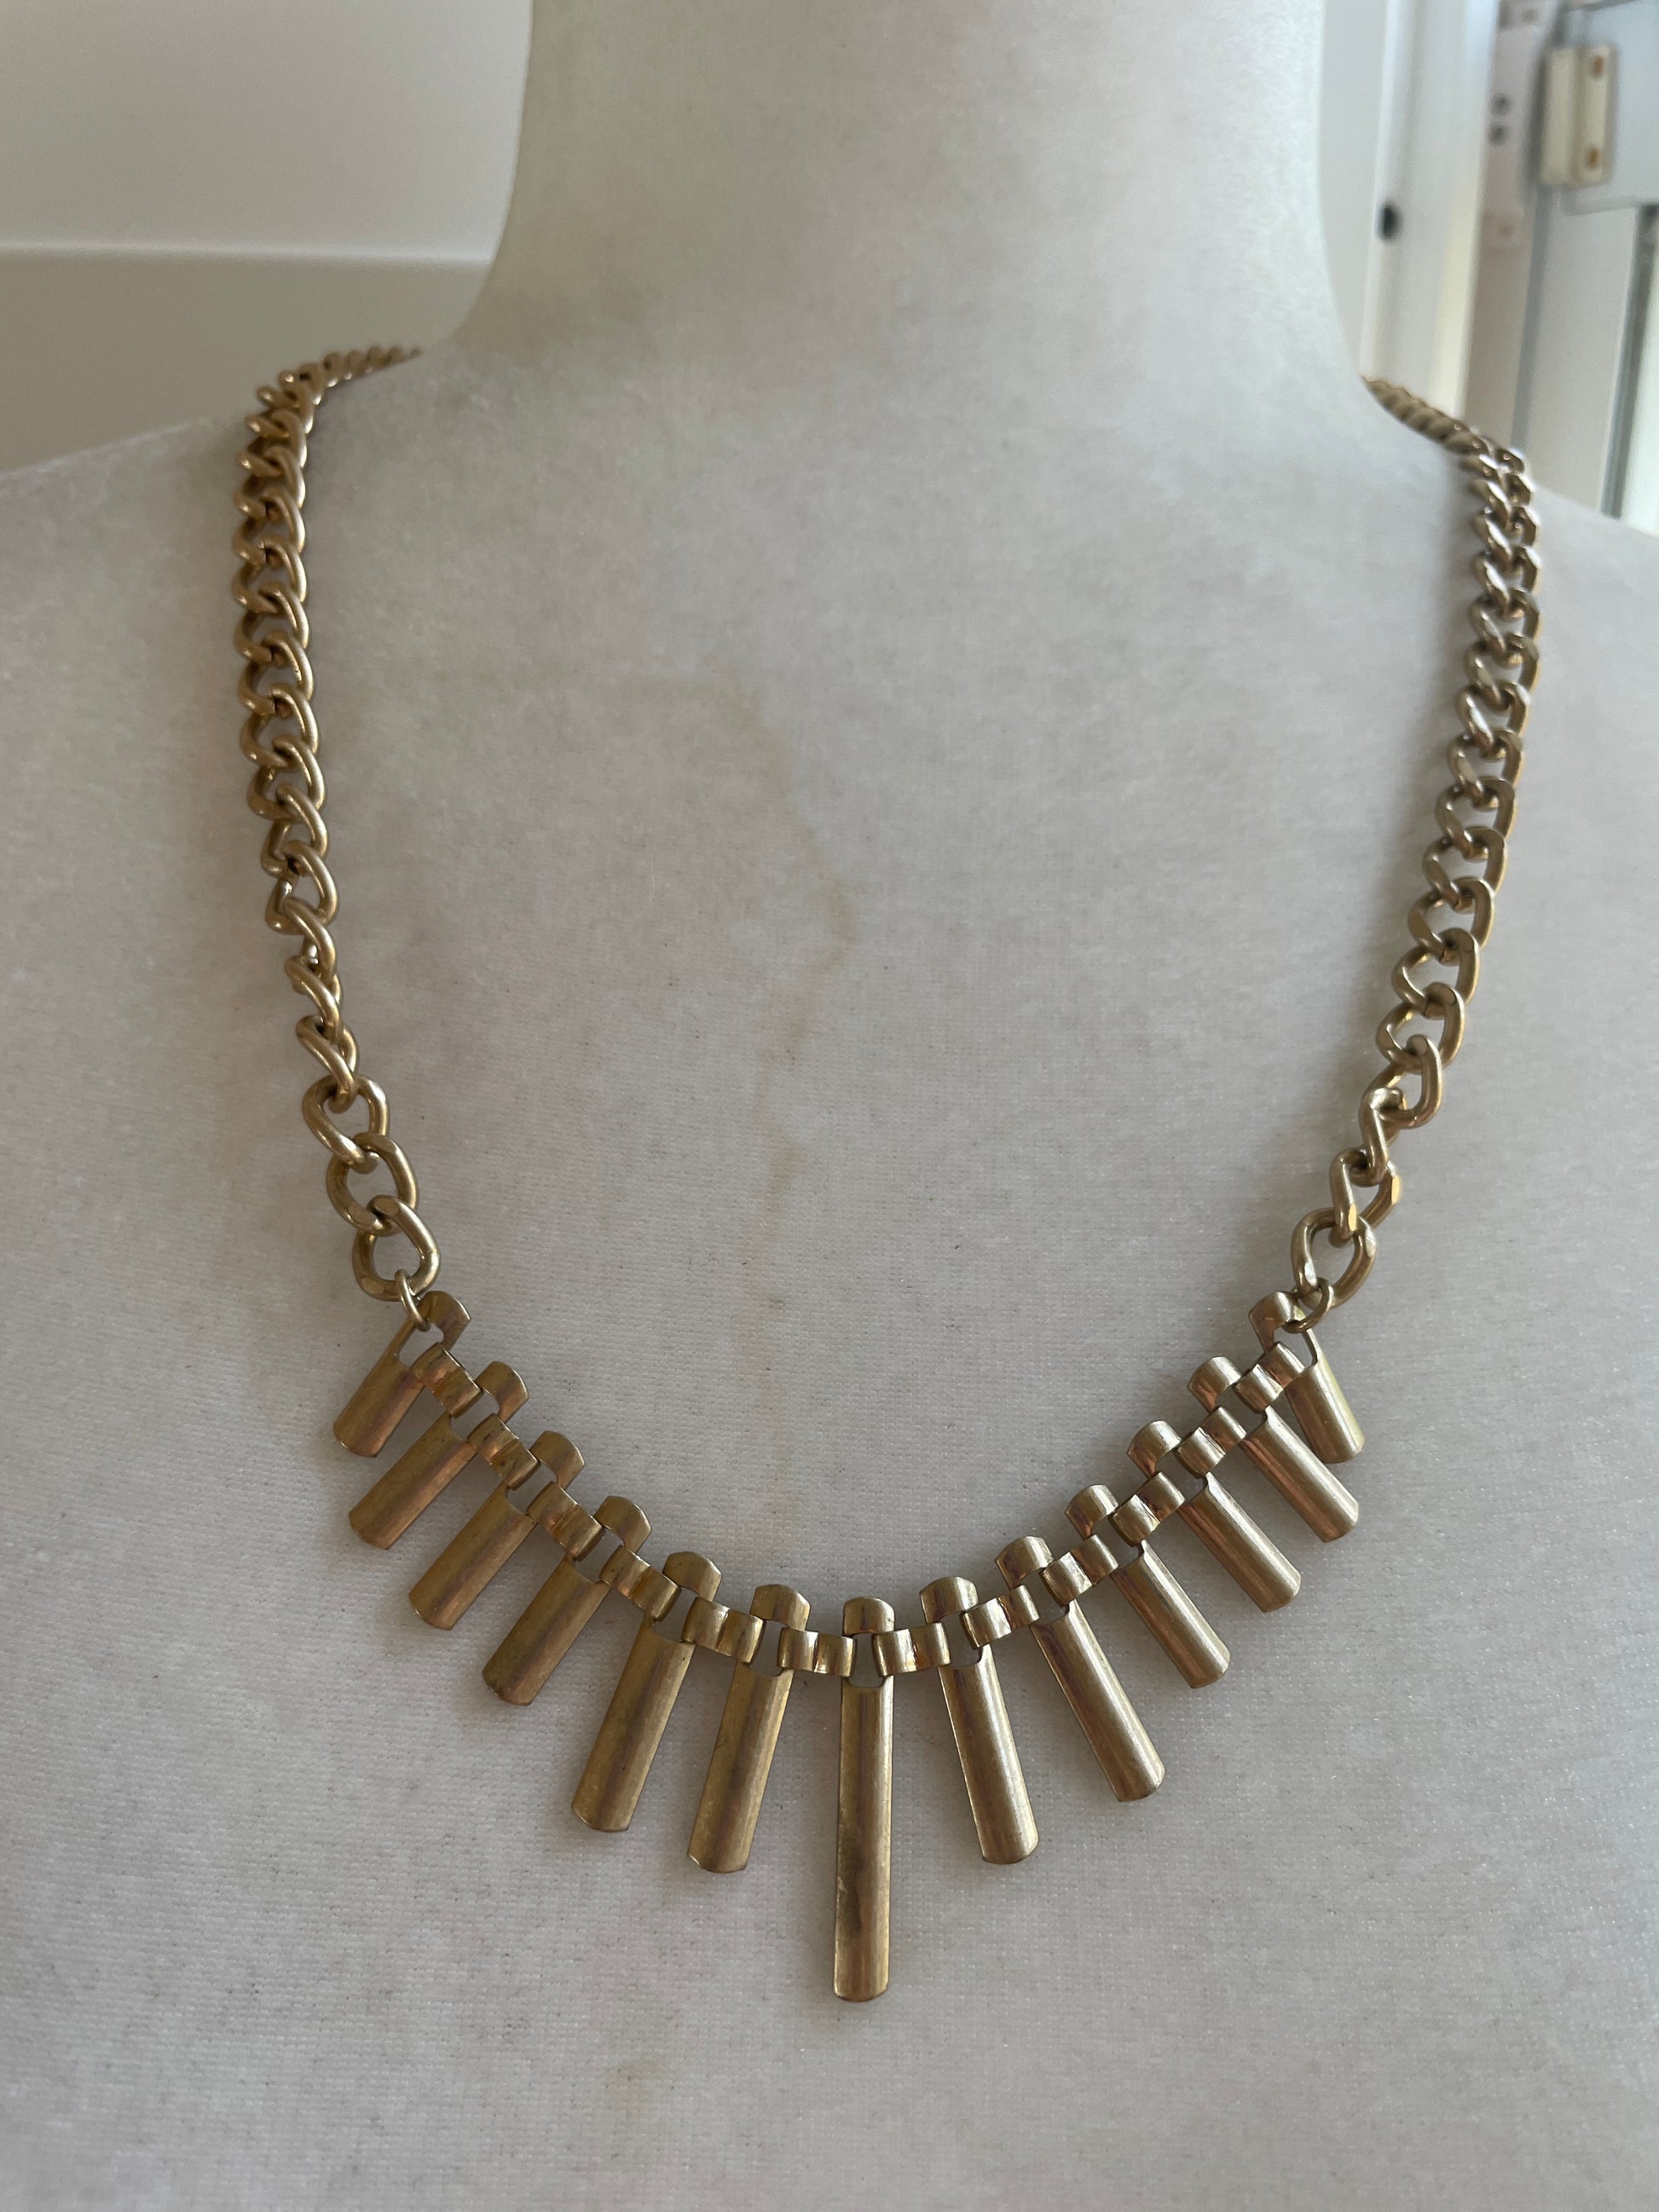 80s Egyptian Style Necklace  80s Gold Tone Spiked Egyptian Style Necklace